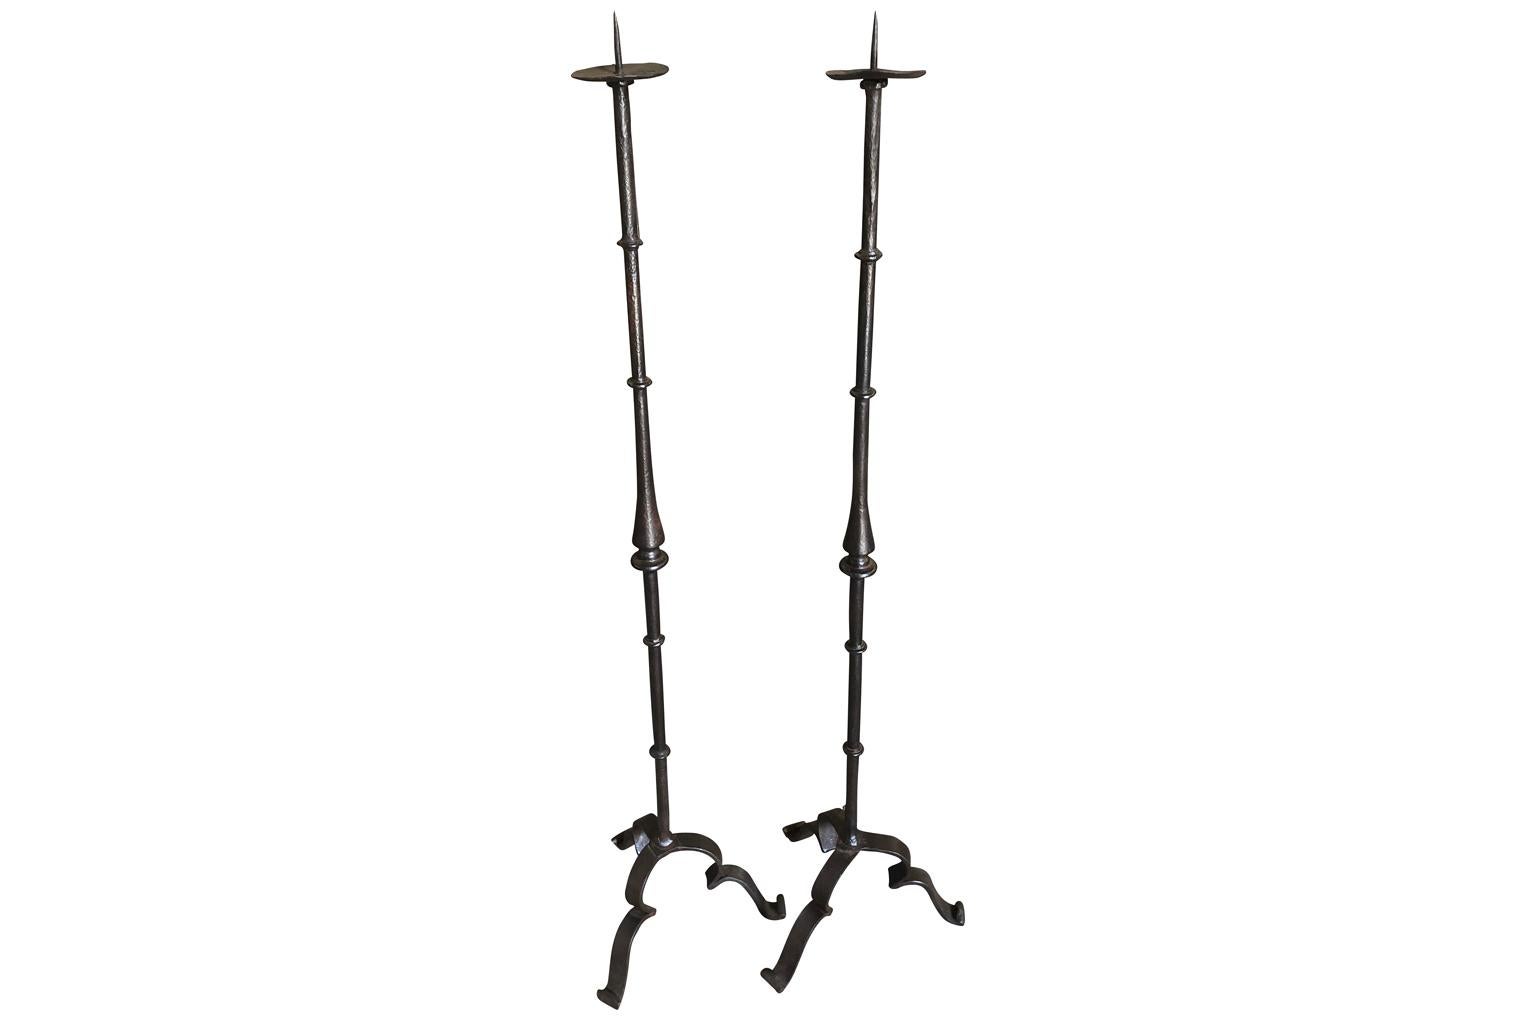 A very handsome pair of late 18th century Italian Torcheres. Beautifully fashioned from hand forged iron. Wonderful for candles or electrified as floor lamps.